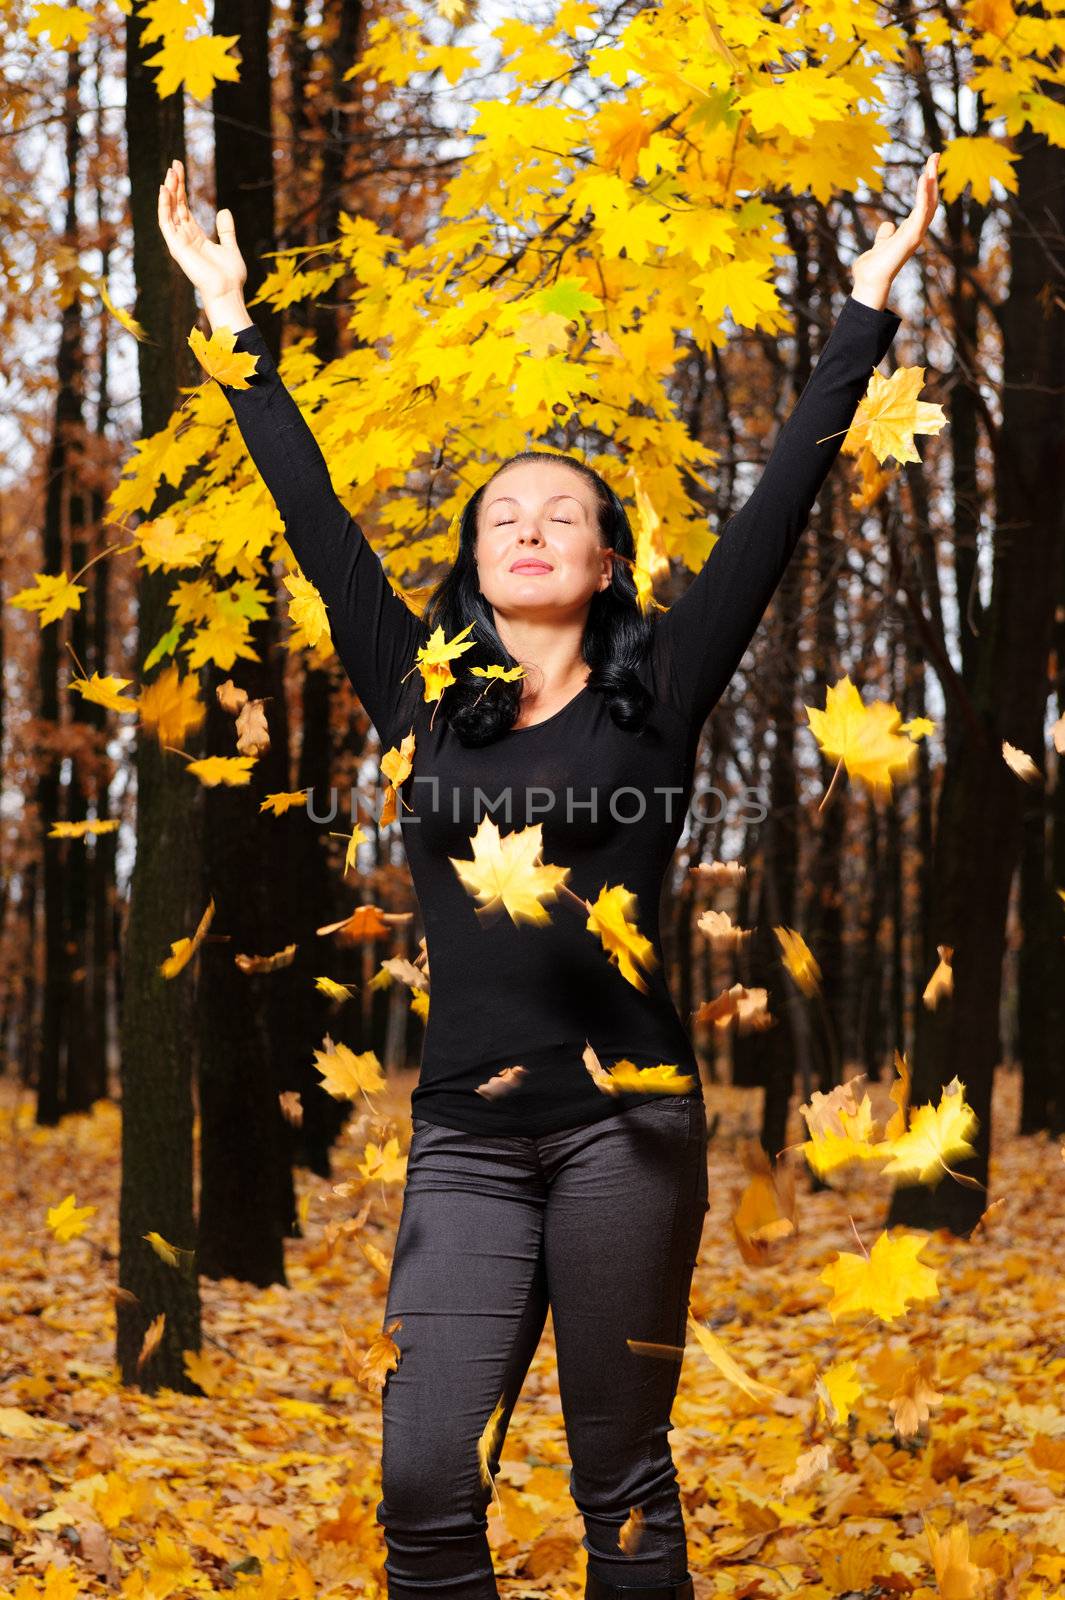 The women with the lifted hands autumn forest. Falling yellow leaf